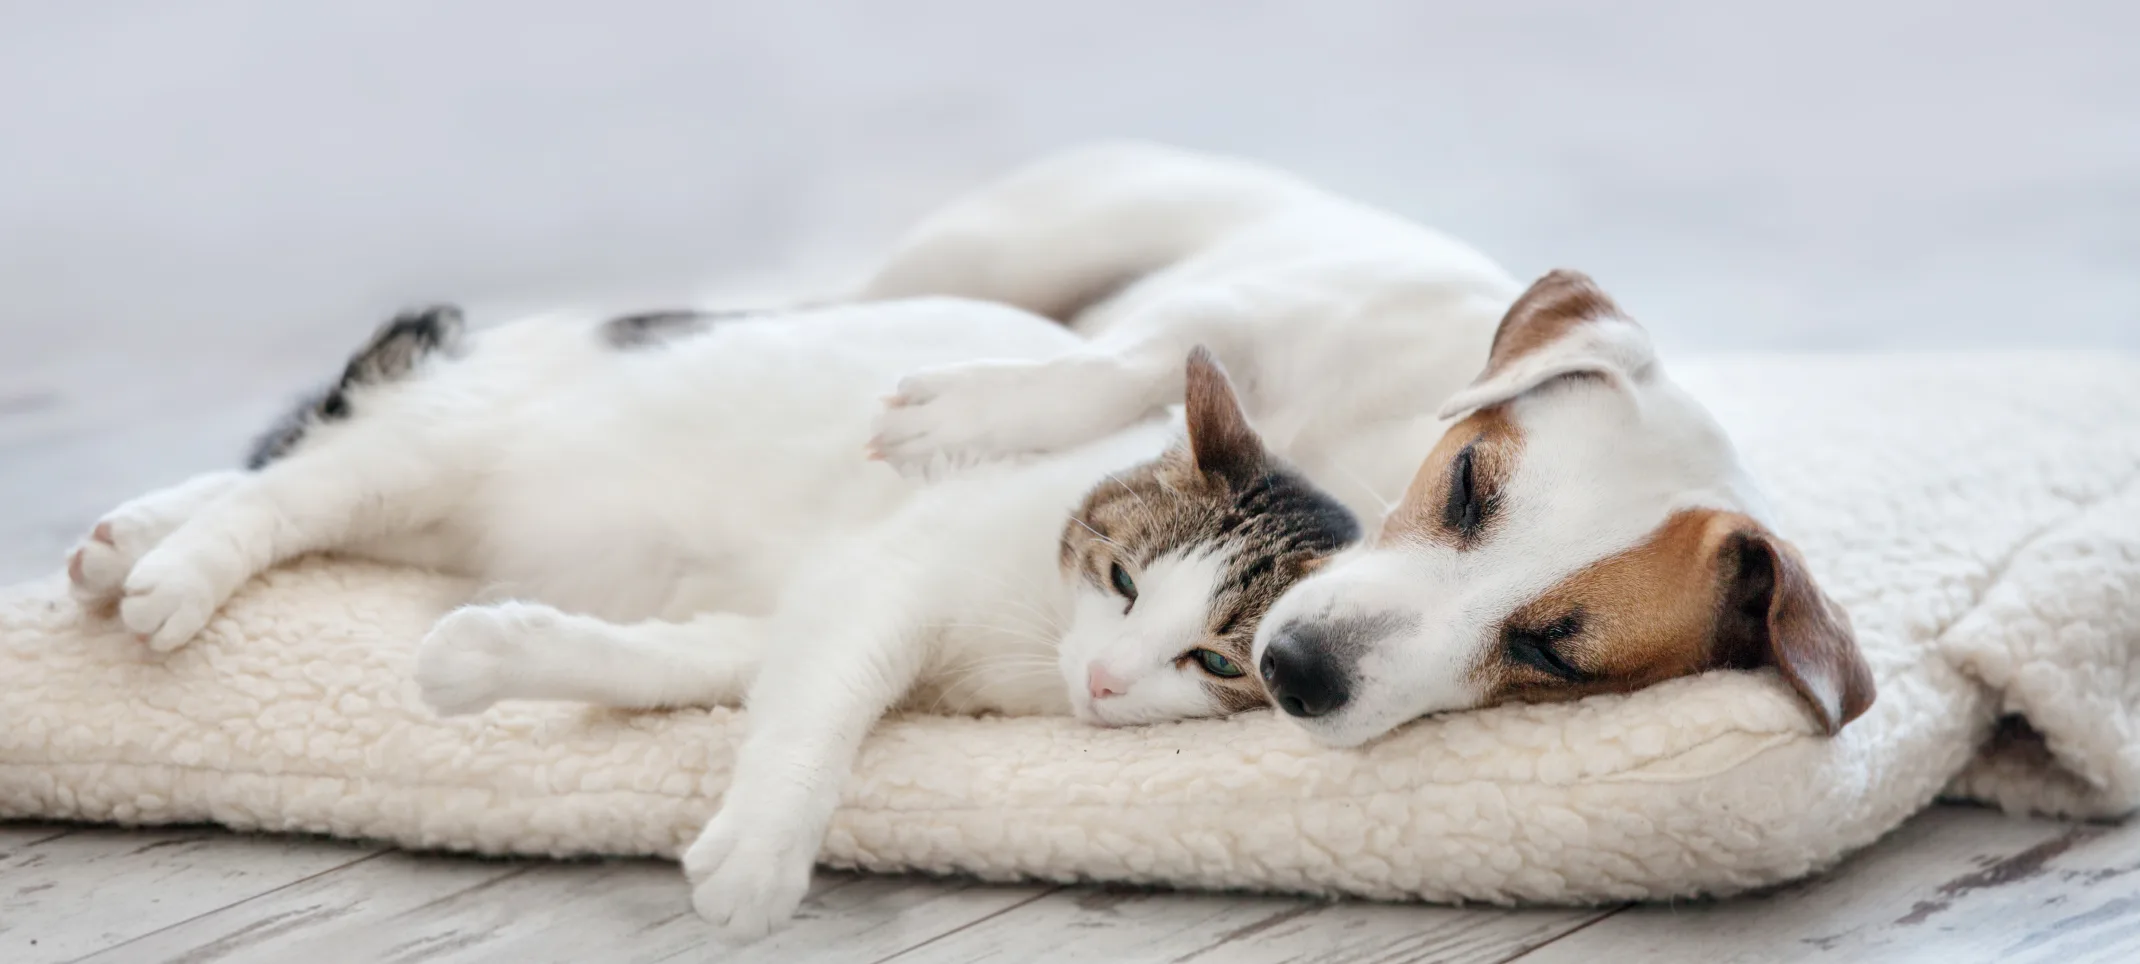 A small white and brown dog and cat sleeping together inside on a blanket 